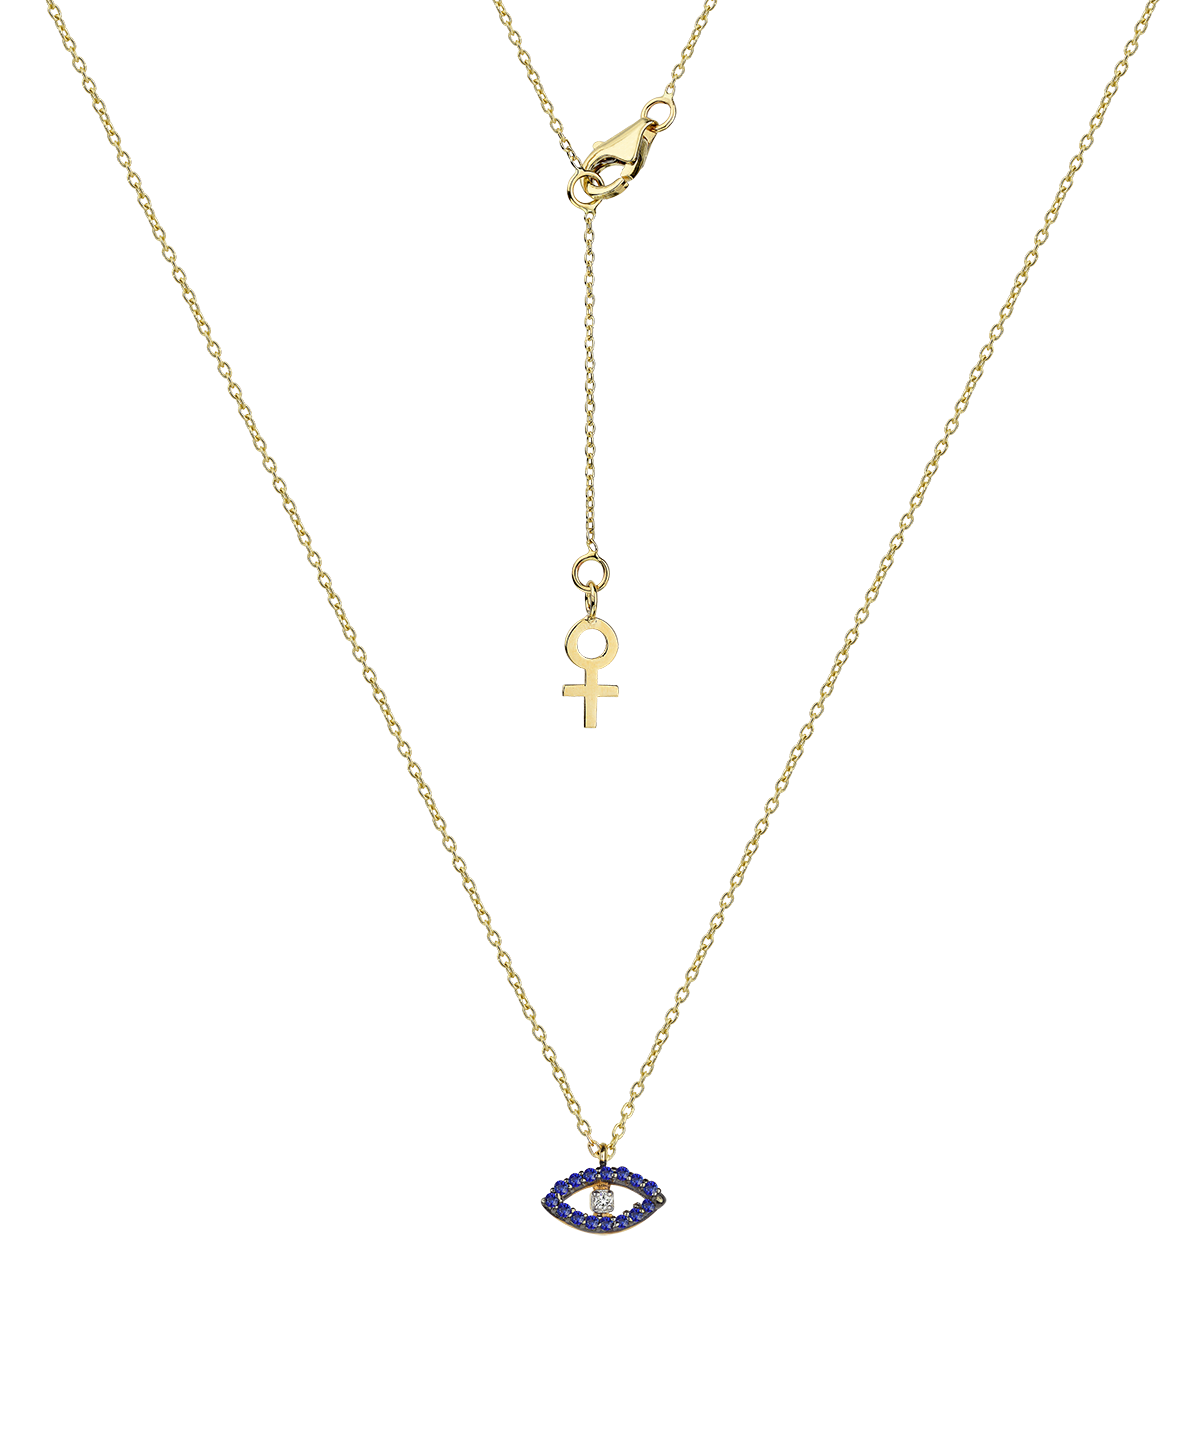 Mini Full Magic Knot Necklace in Yellow Gold - Her Story Shop